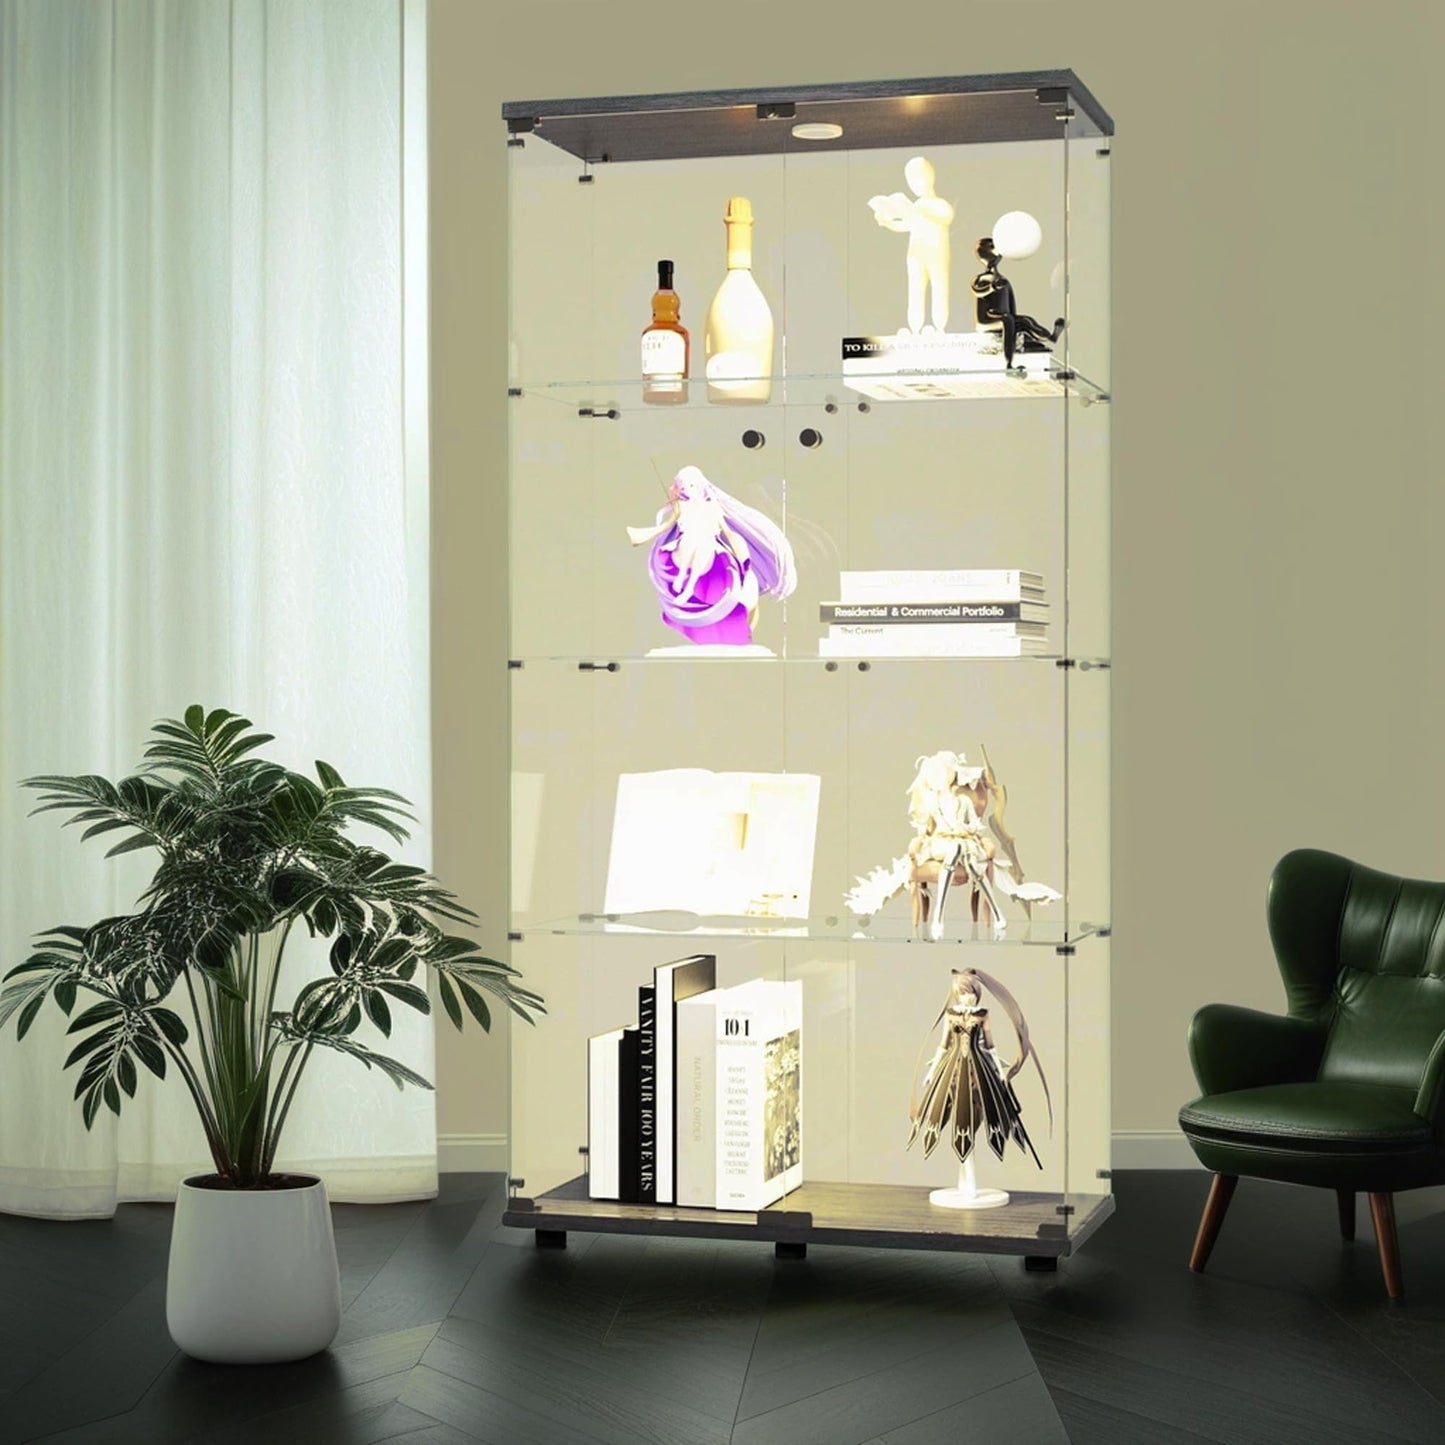 Zacis Glass Display Cabinet with Lights and Lock, 4-Tier Display Case Curio Cabinet with Glass Door, Floor Standing Showcase for Living Room Bedroom